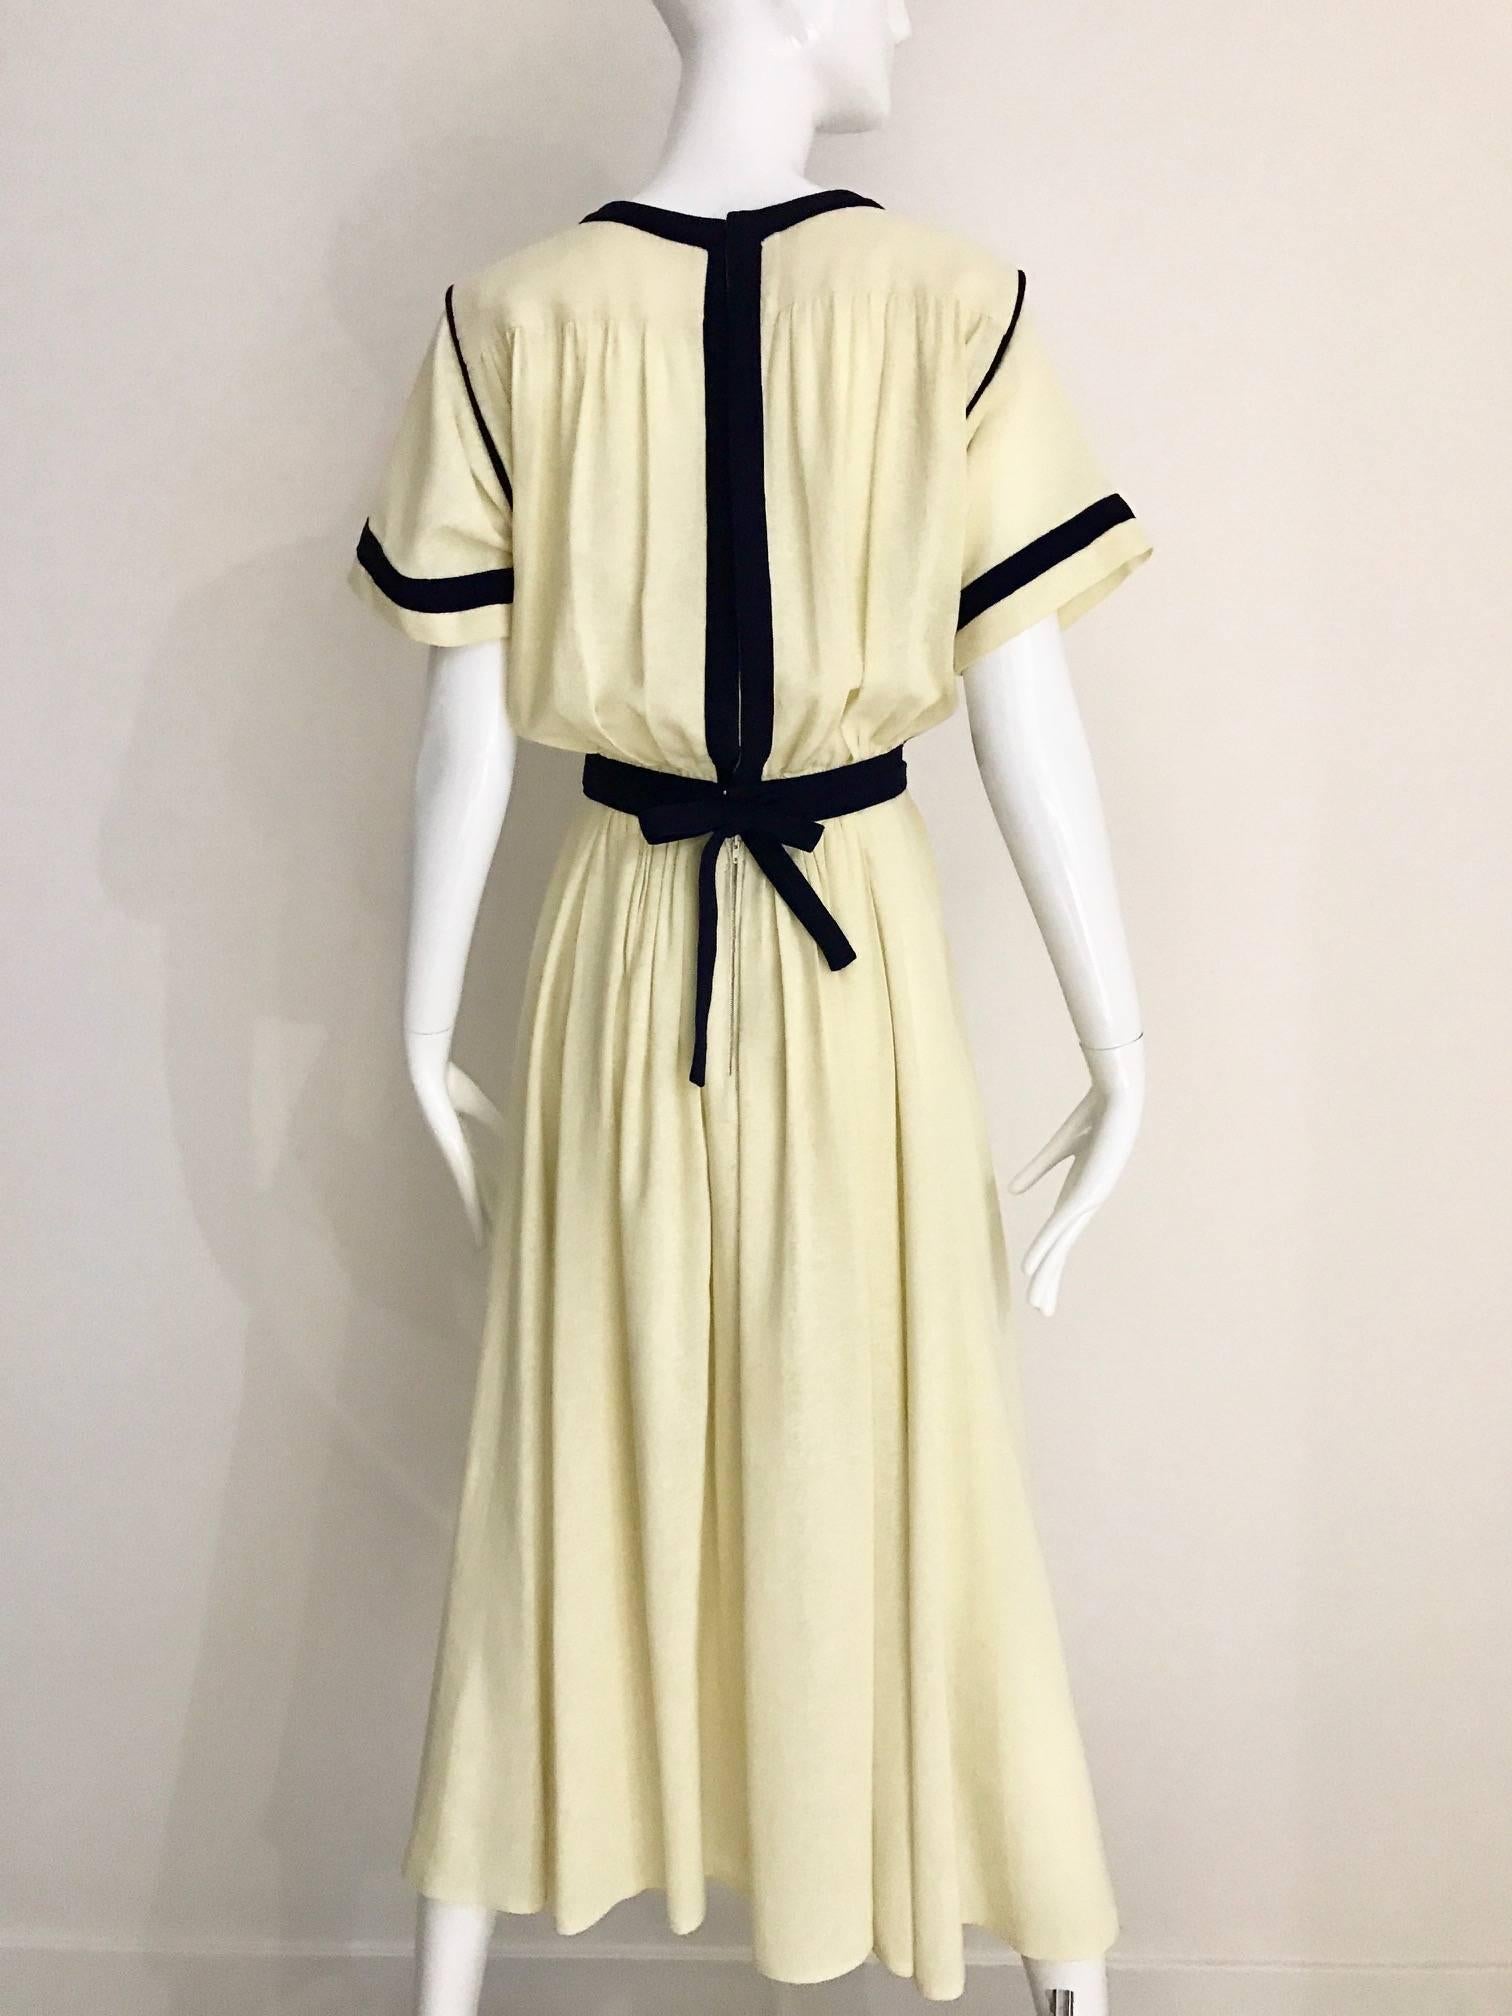 1970s Vintage Chloe creme and blue linen day dress with 2 front pockets. zipped at the back.  Dress lined in silk. Perfect summer vacation dress. Back is peek a boo and you can wear it reversible. see image#7
This Chloe dress designed by Karl